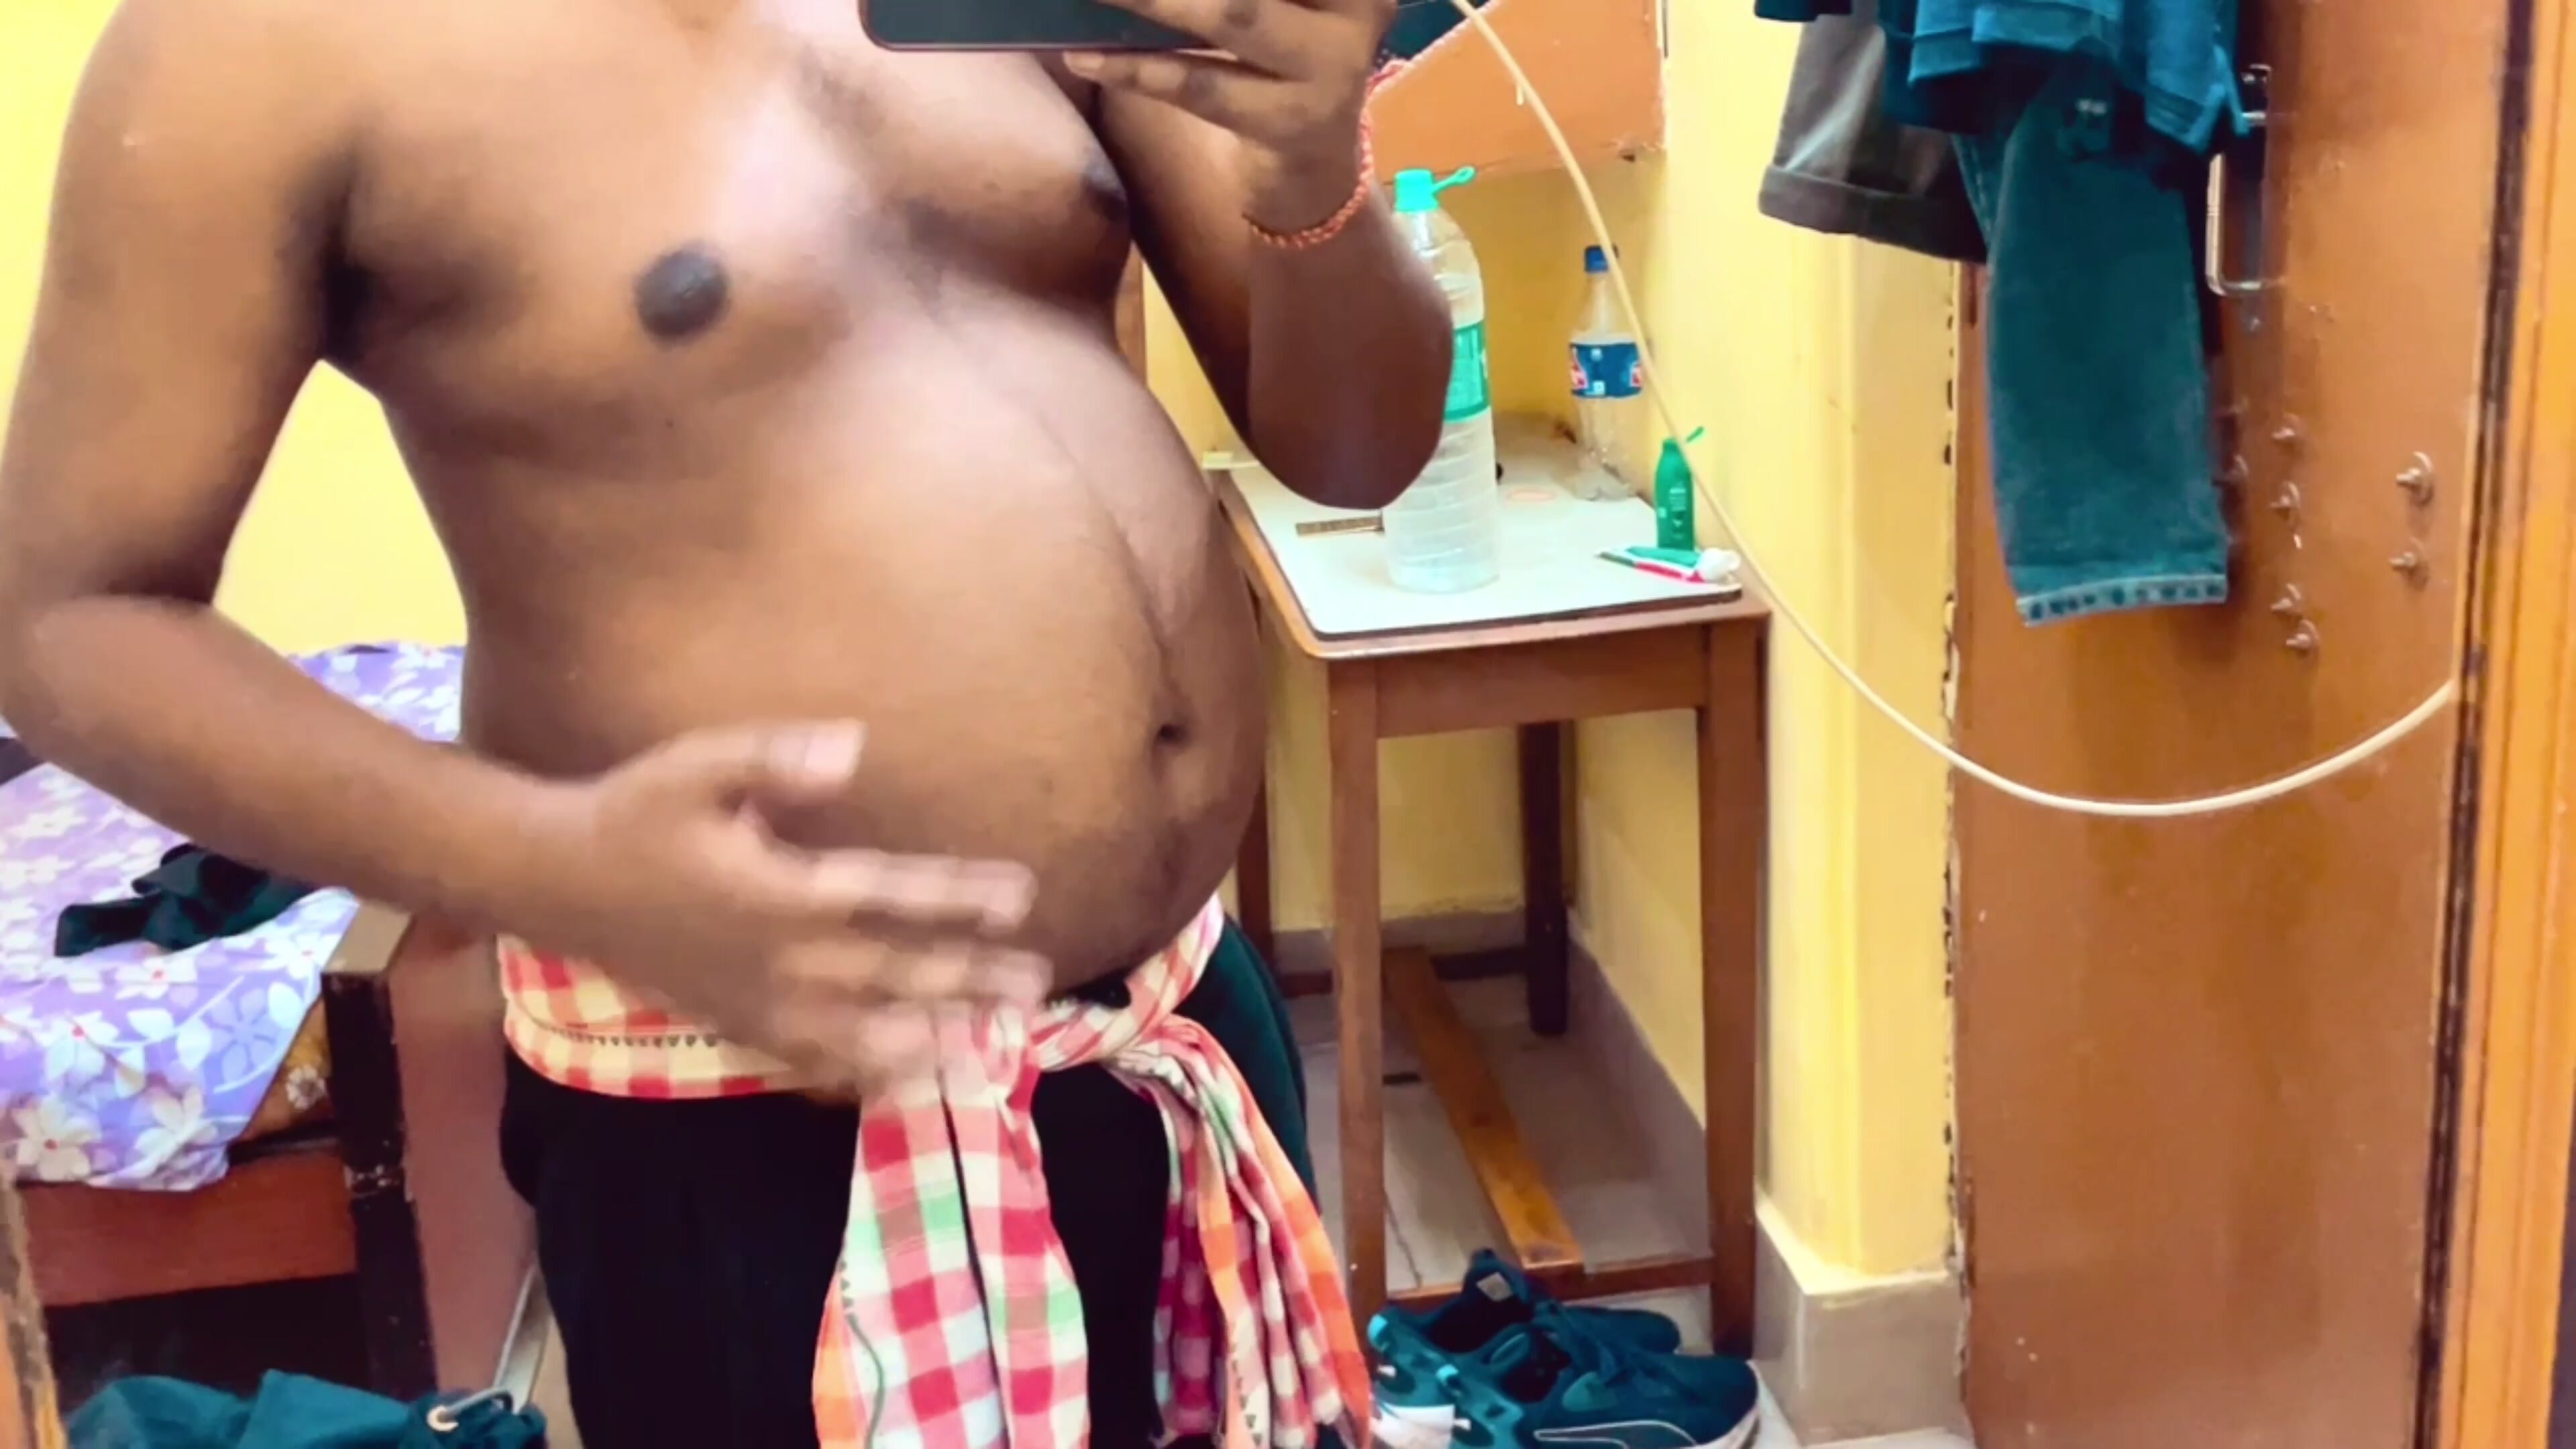 Creamy Belly …come and clean it - video 2